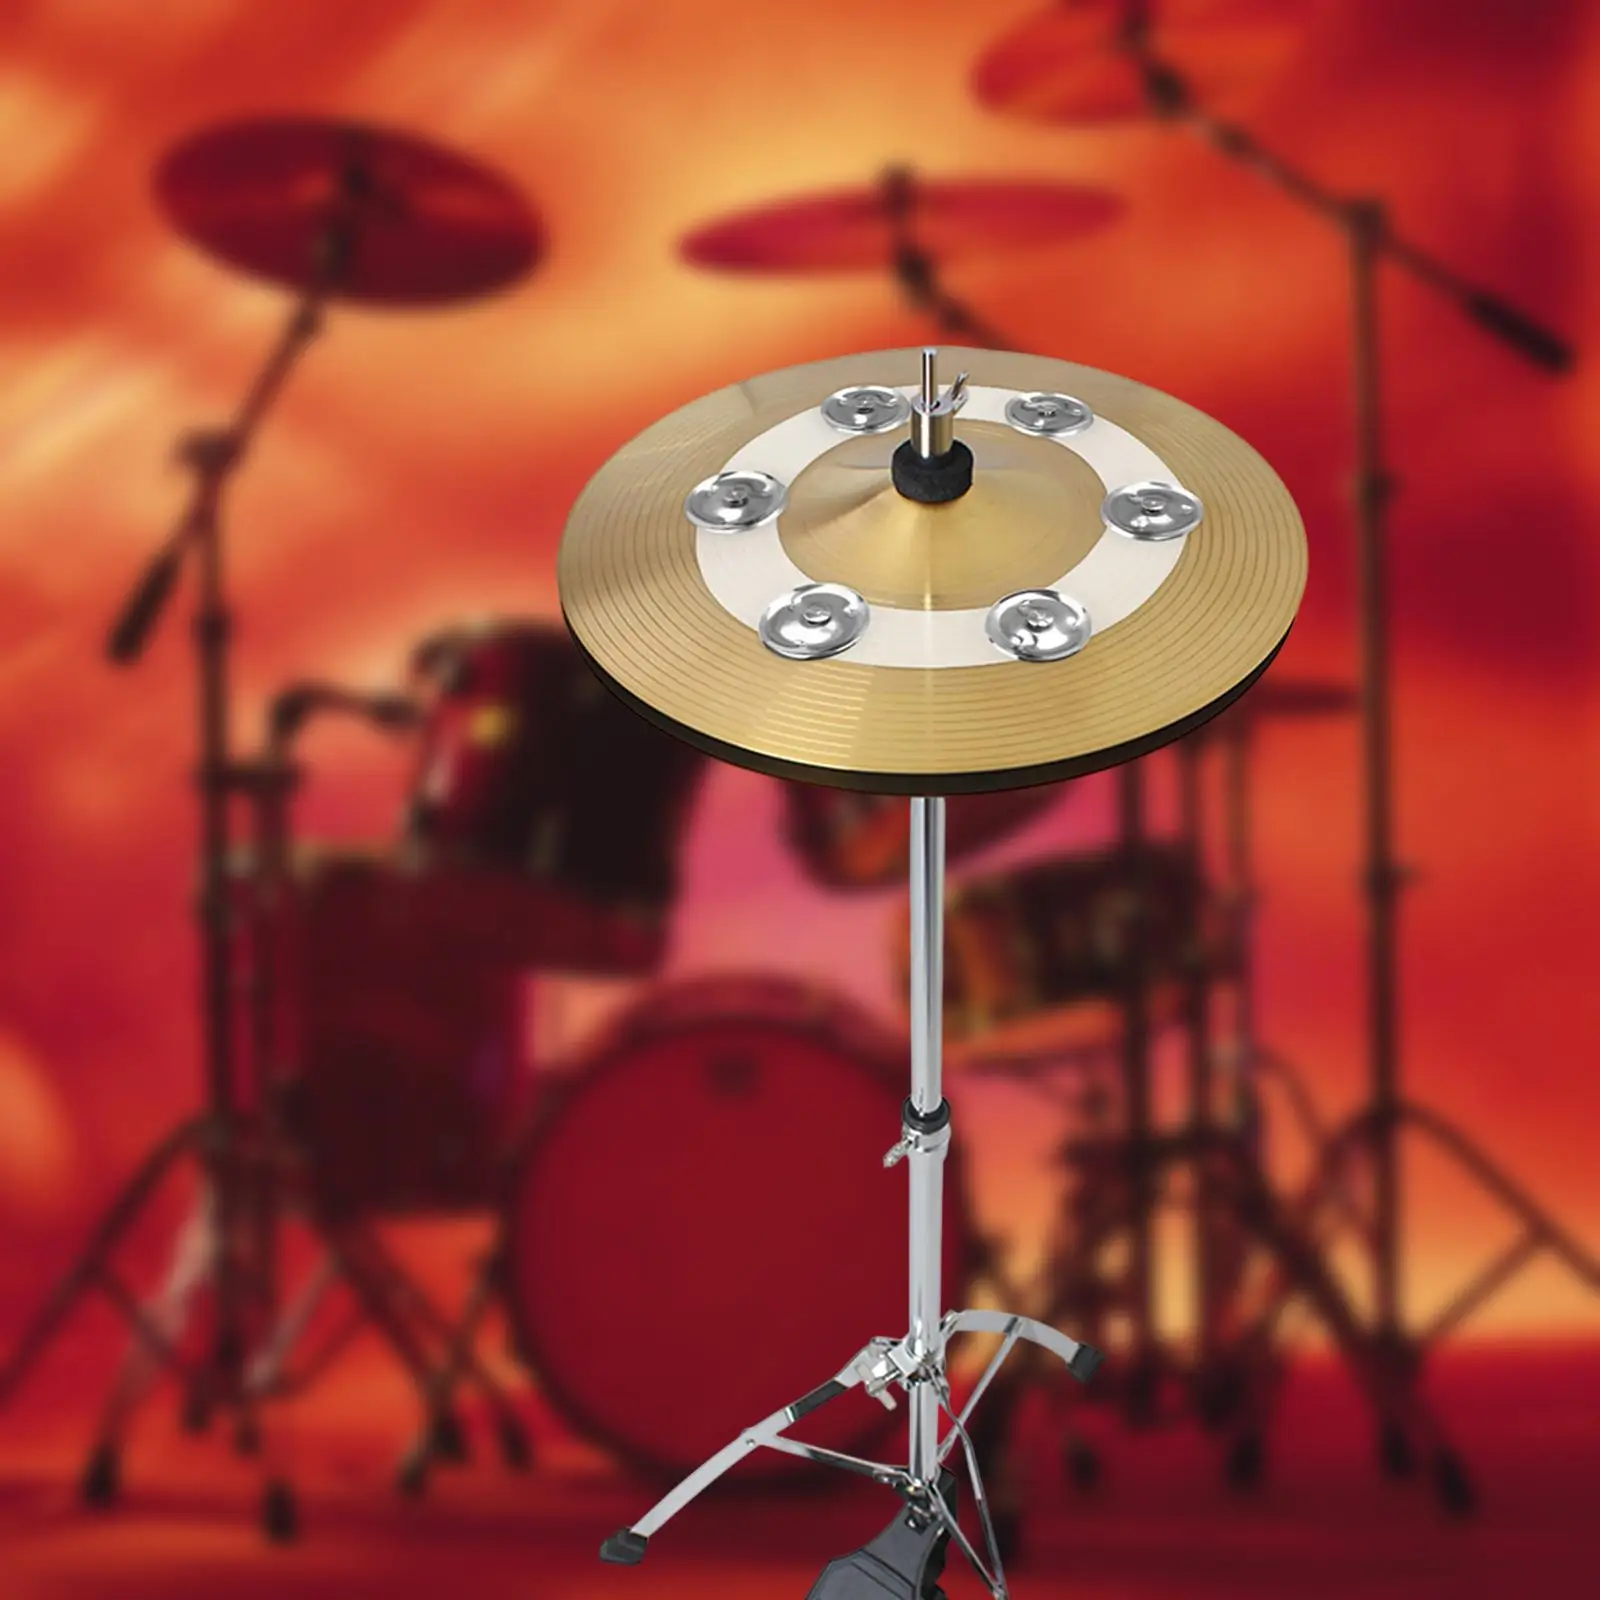 Cymbal Rings Portable Ching Rings Tambourine for Drum Cymbal Drum Set Performance Jingle Drum Set Tambourine Drum Cymbals Rings